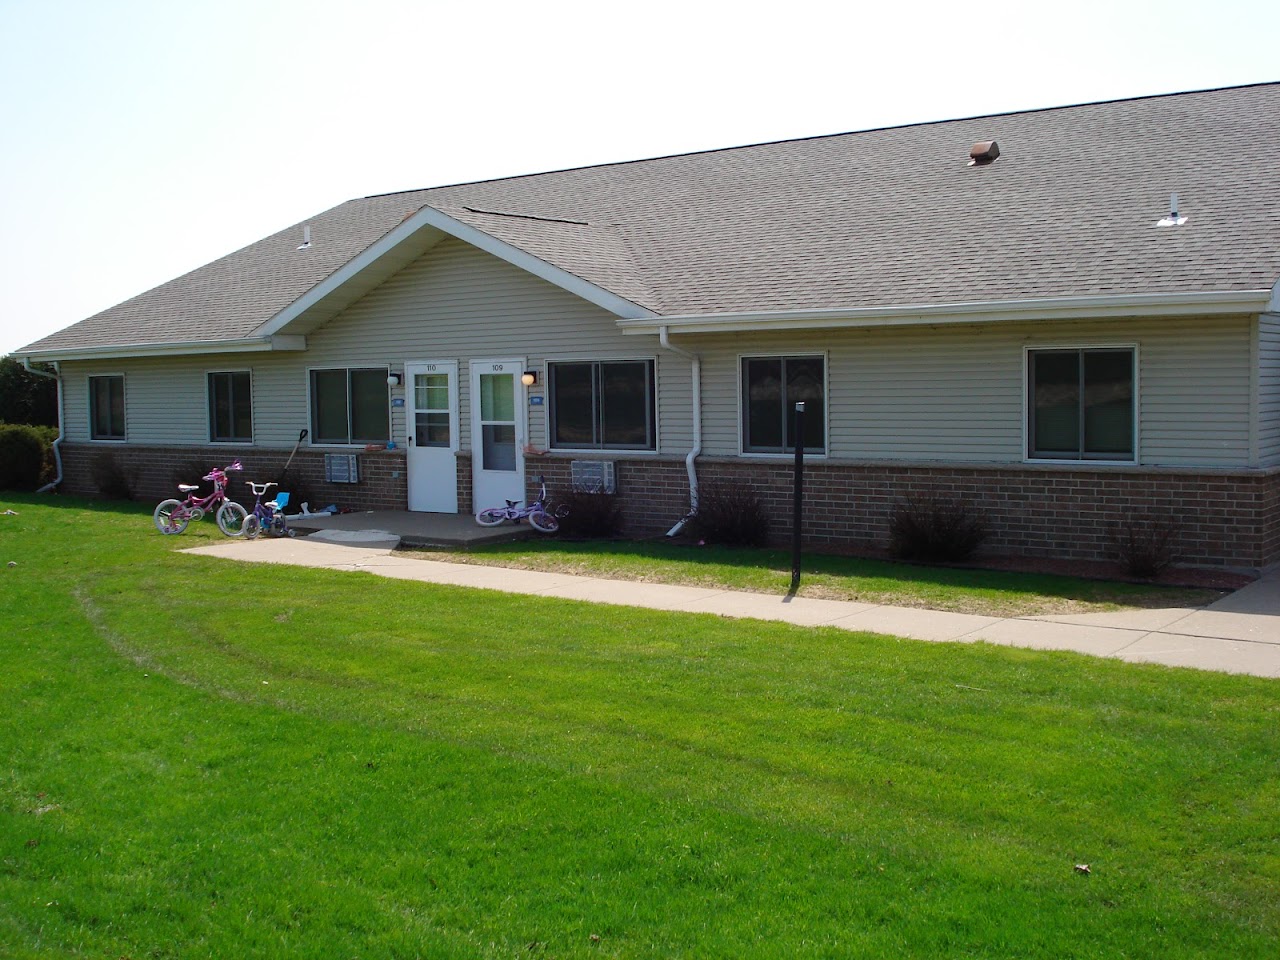 Photo of PARK STREET APTS. Affordable housing located at 102 N PARK ST BELMONT, WI 53510